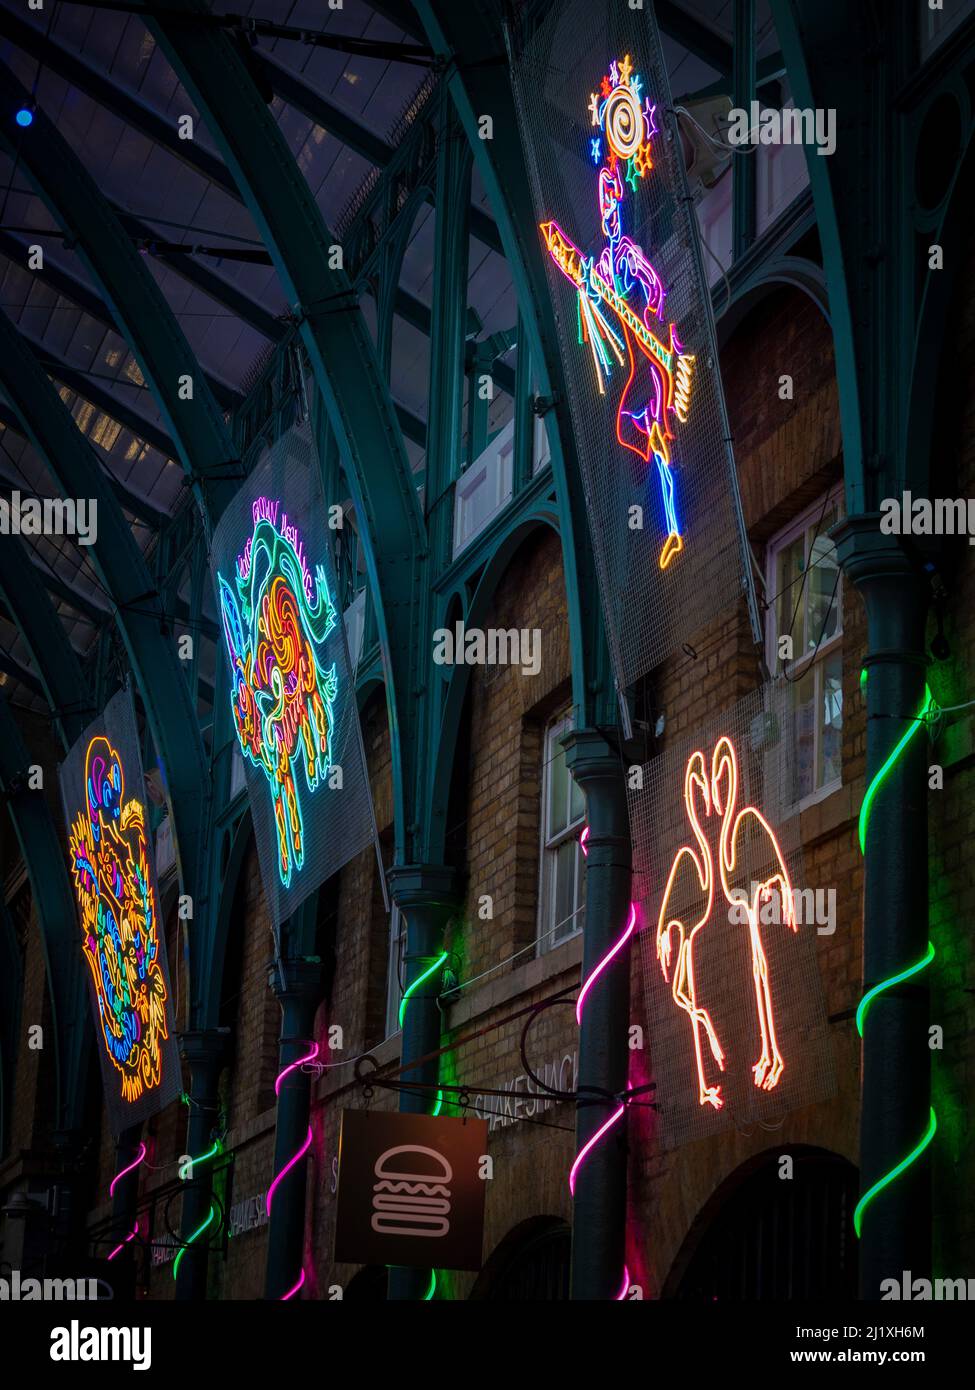 2D neon light art installations by Chila Burman suspended between metal roof trusses of the Market Hall at Covent Garden, London. Stock Photo